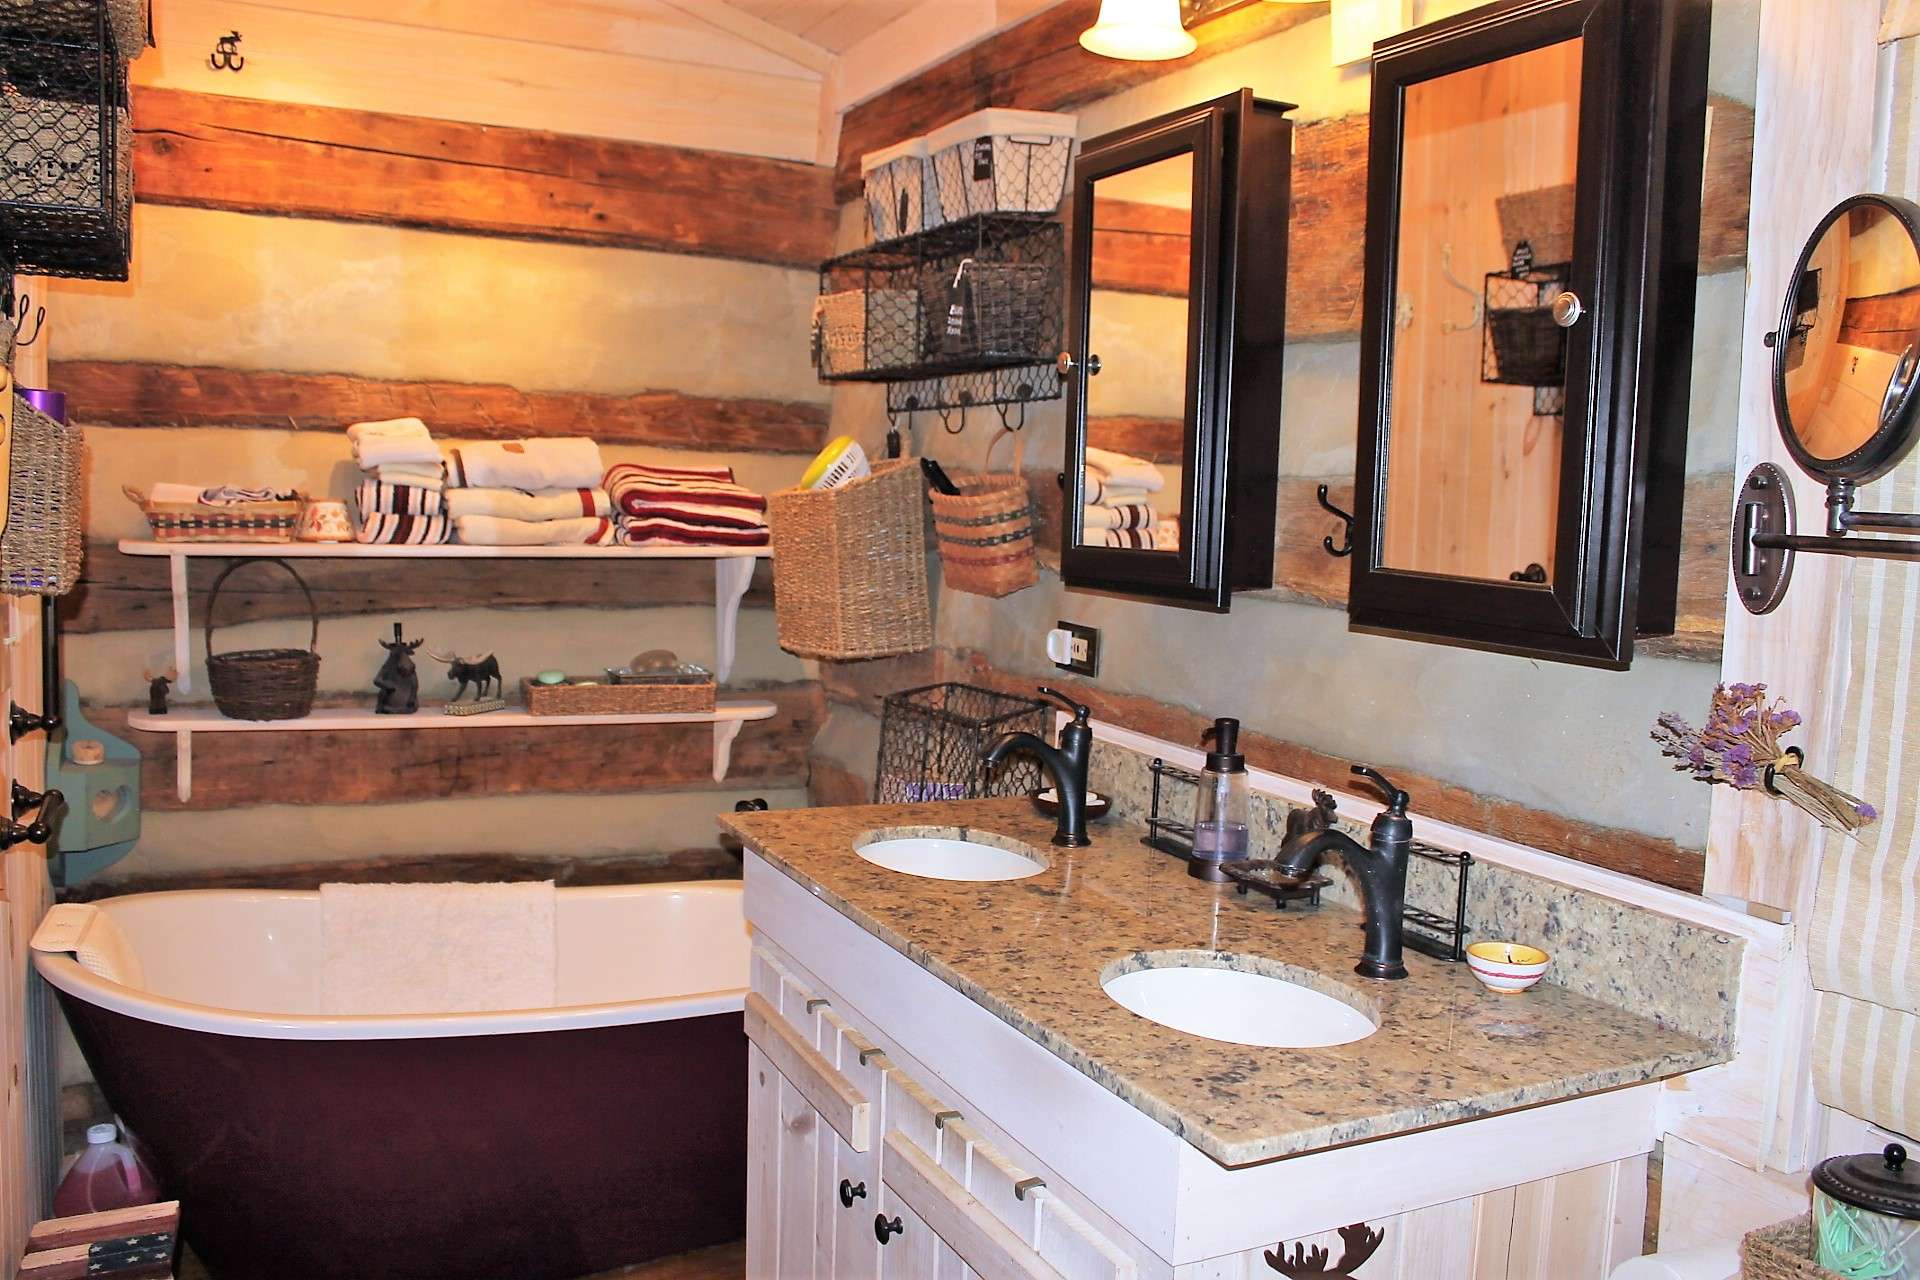 Master bath has dual sinks and a soaking tub to relax in after a day of hiking in the mountains.